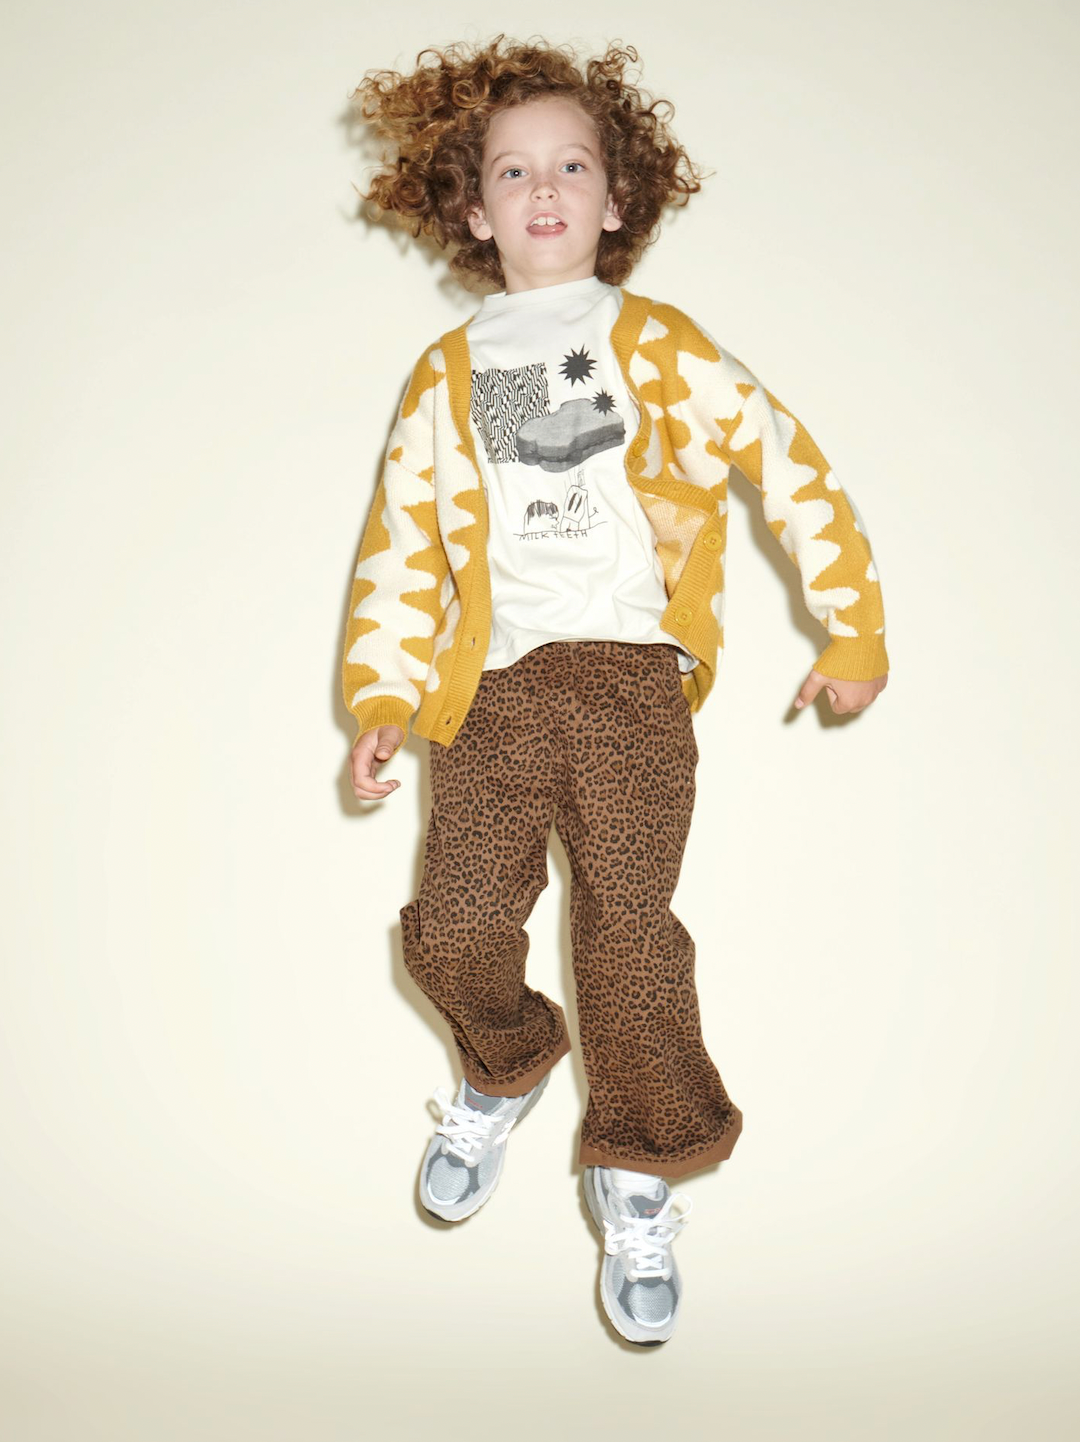 A child jumping in a cream and black Sandwich Tee under a Wavelength Cardigan in marigold